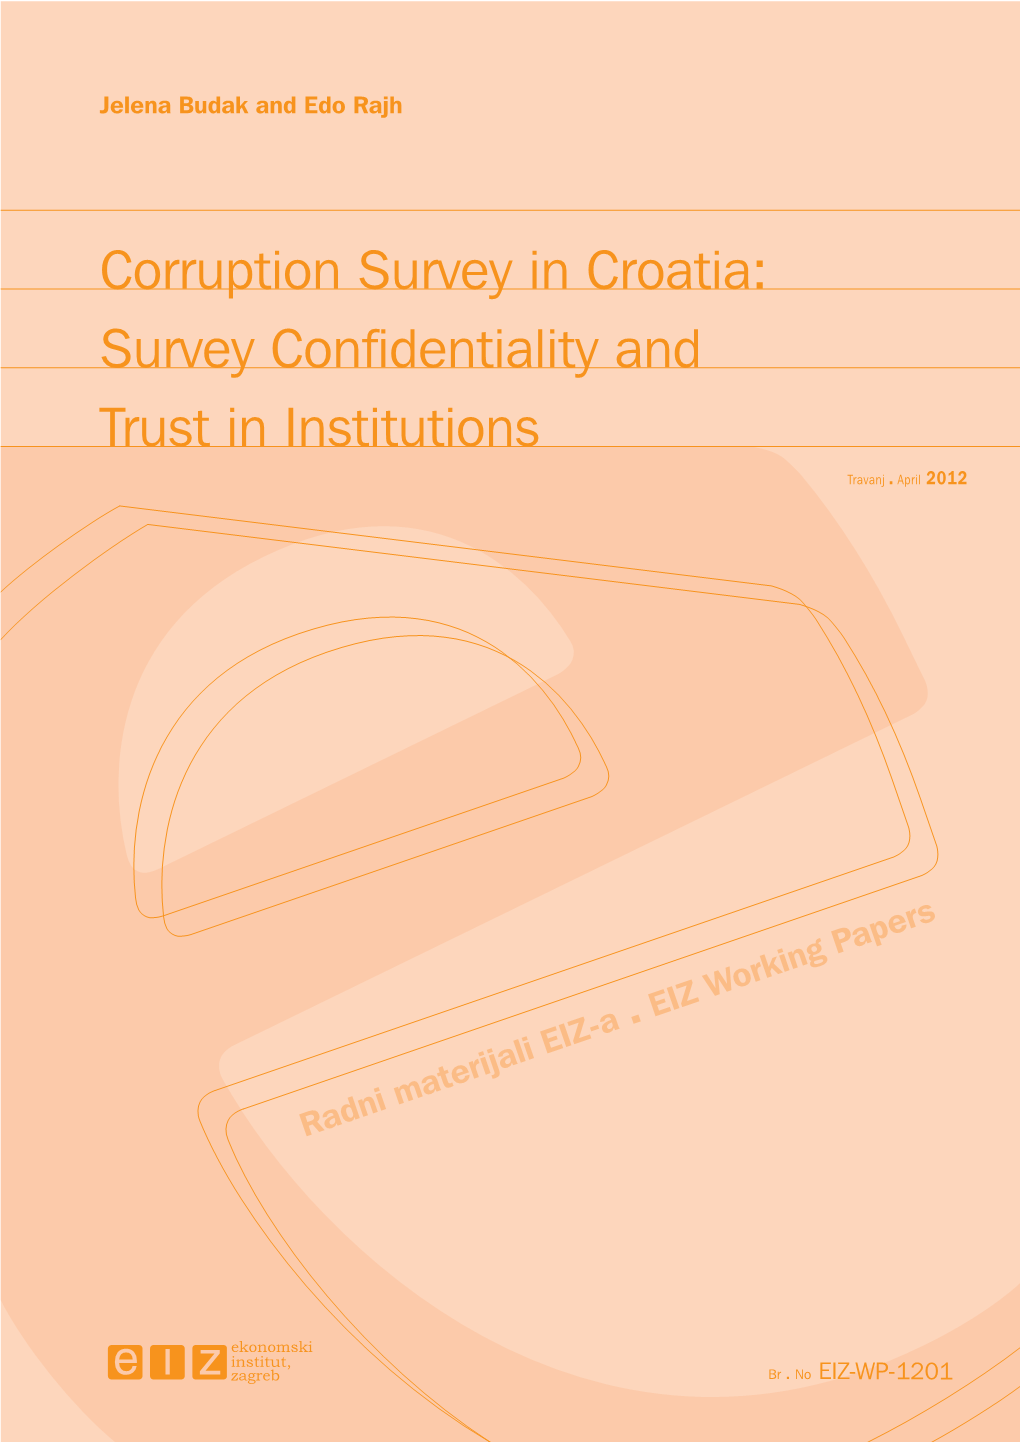 Corruption Survey in Croatia: Survey Confidentiality and Trust in Institutions